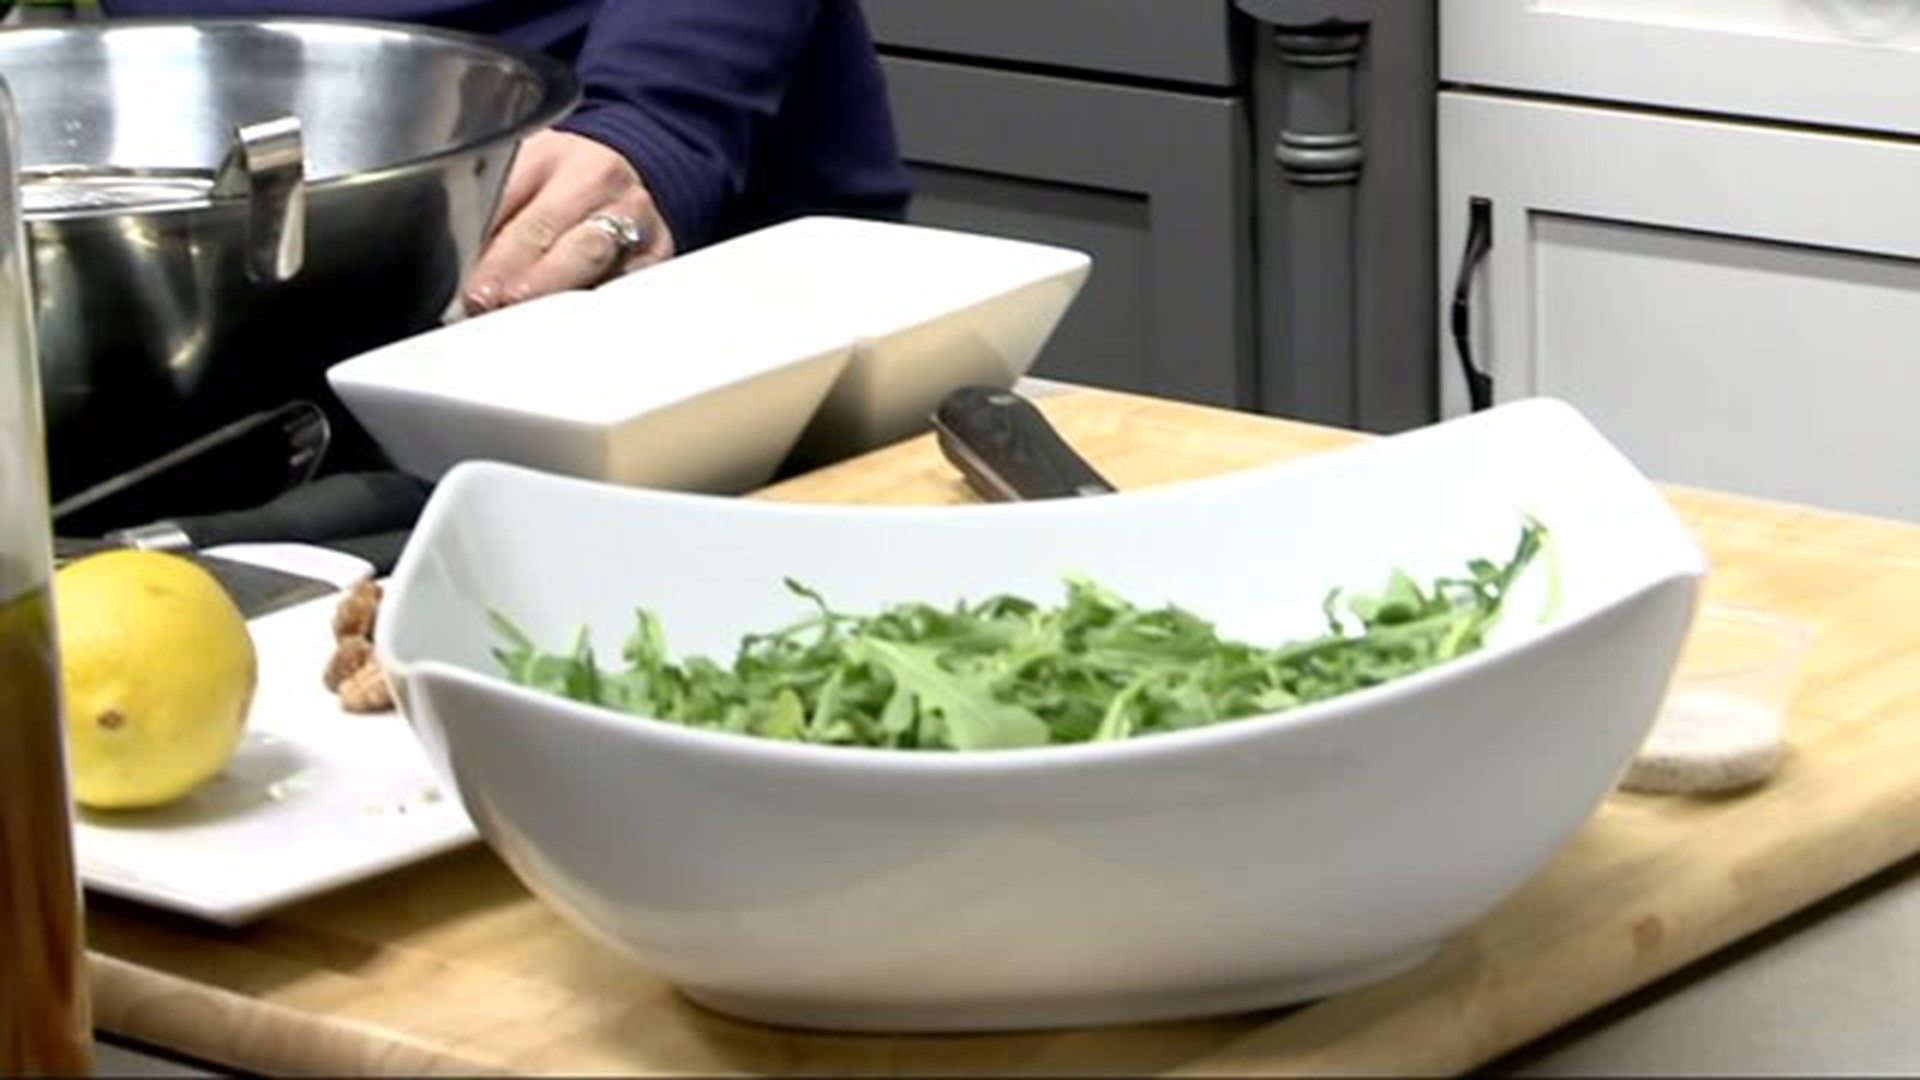 Zanelli`s kicks off our Flavors of York week in the FOX43 Kitchen